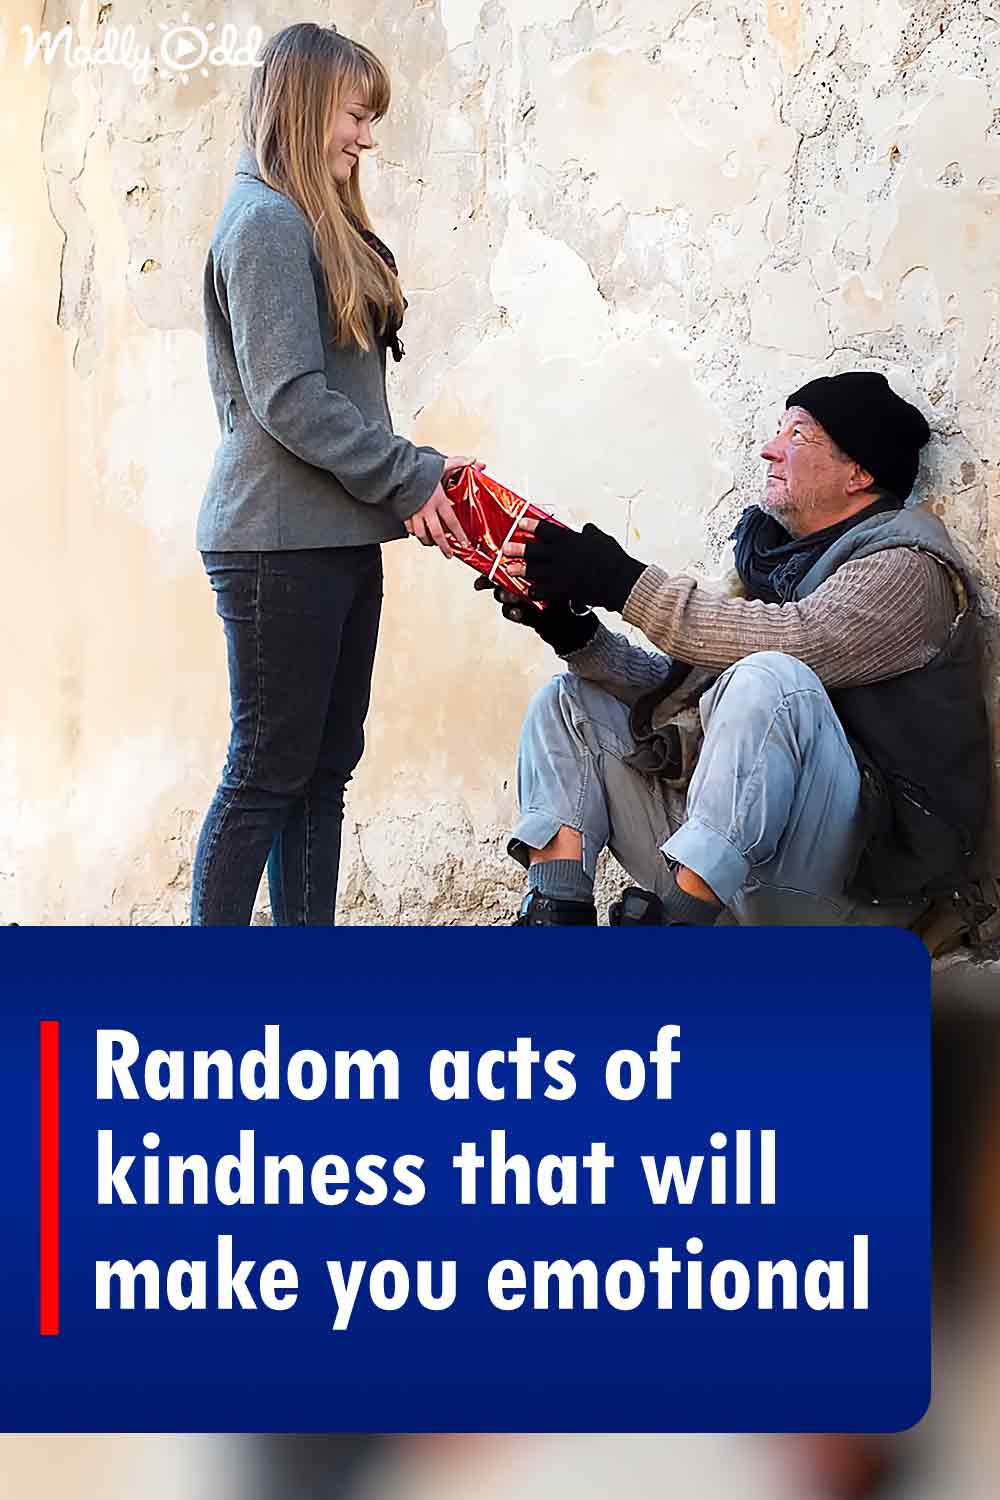 Random acts of kindness that will make you emotional